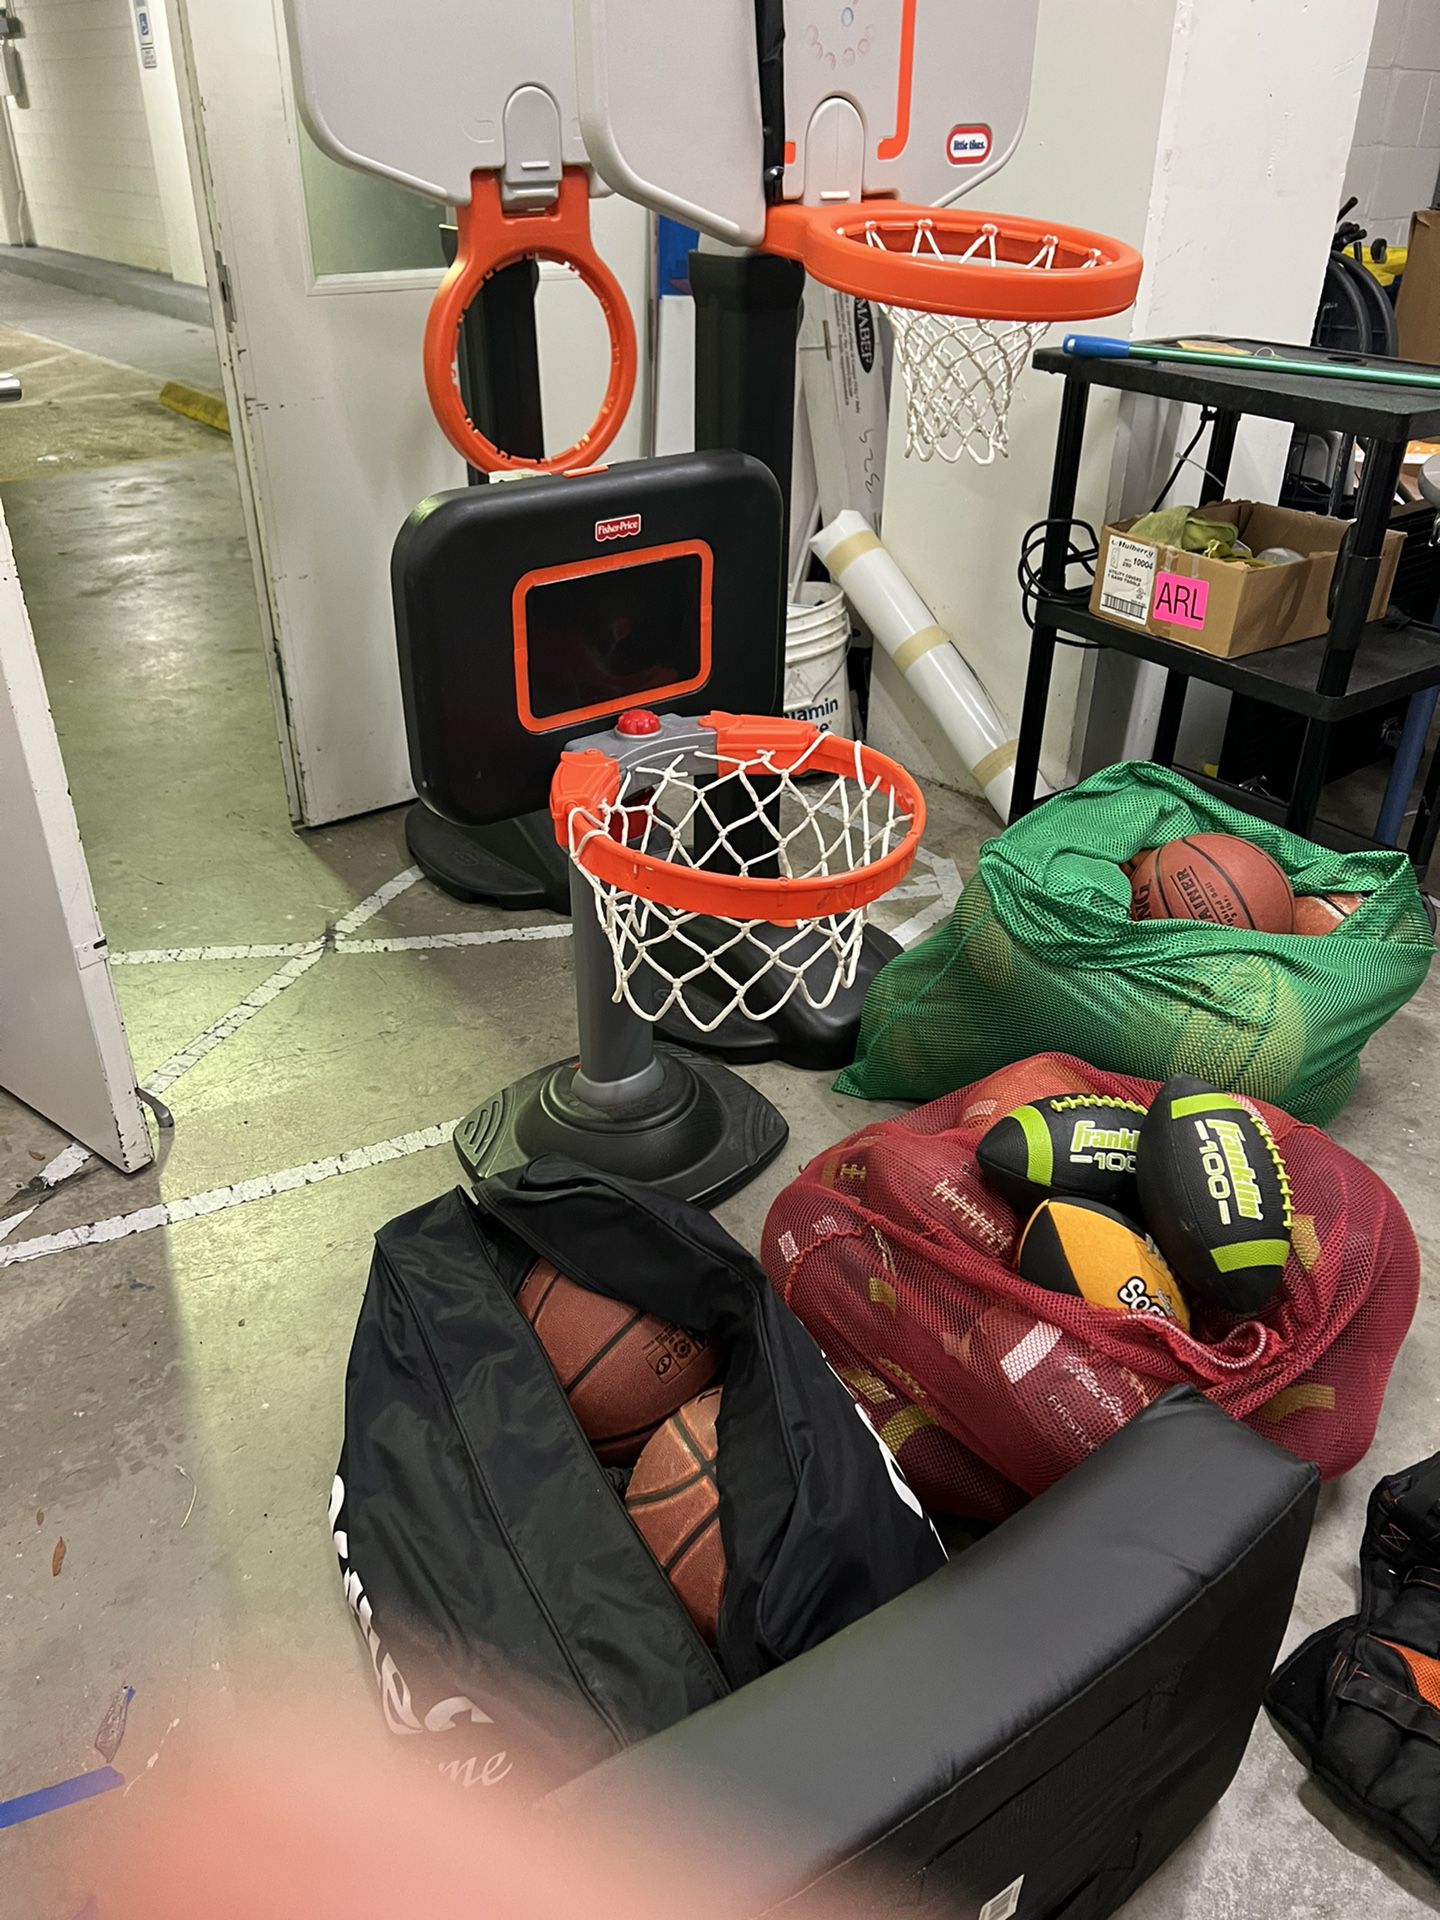 Sports equipment and work out In great condition Willing To Sale Separate If Need